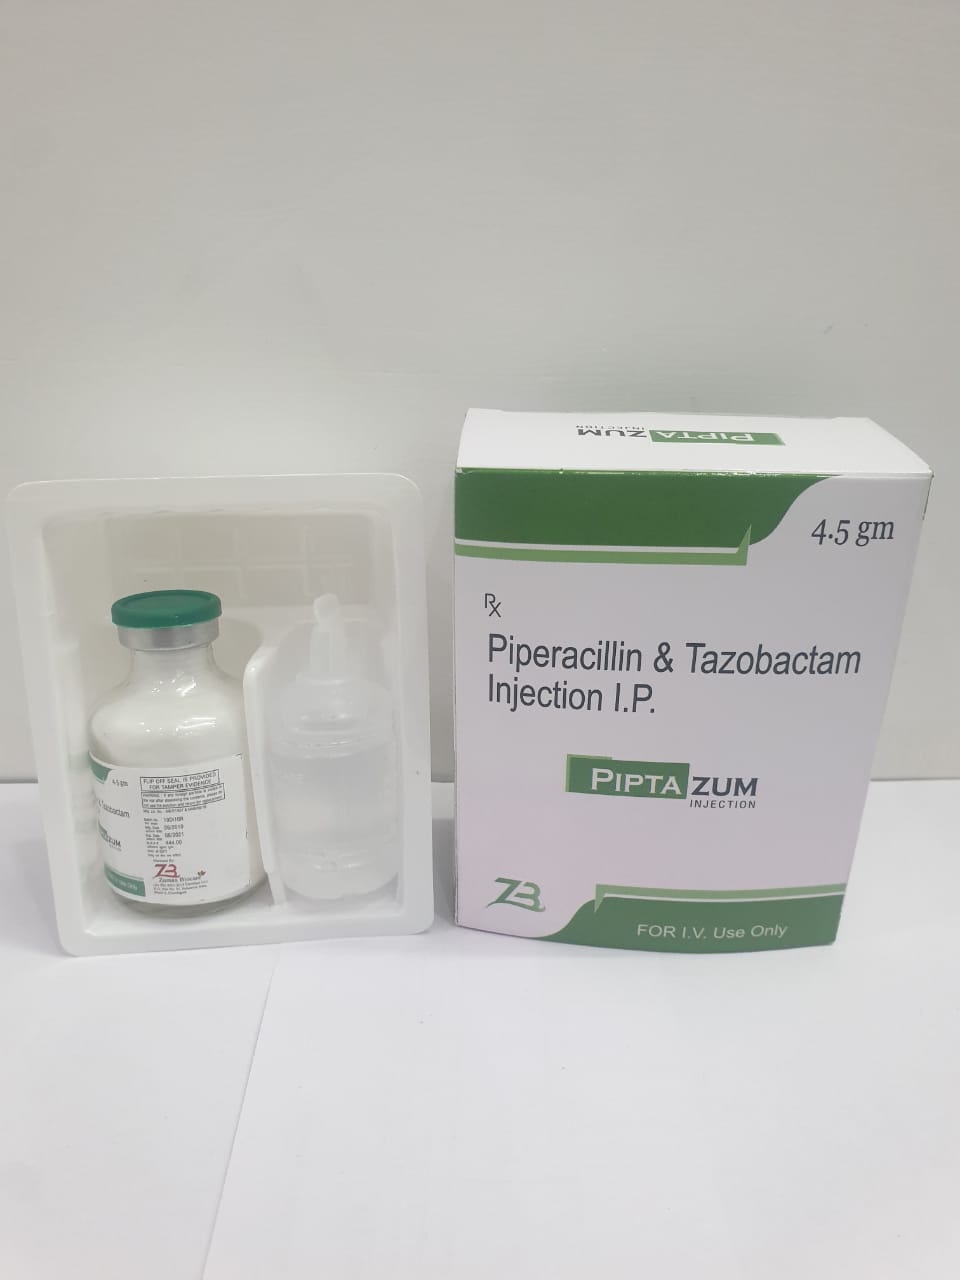 Product Name: Piptazum, Compositions of Piperacillin  & Tazobactam Injection I.P. are Piperacillin  & Tazobactam Injection I.P. - Zumax Biocare